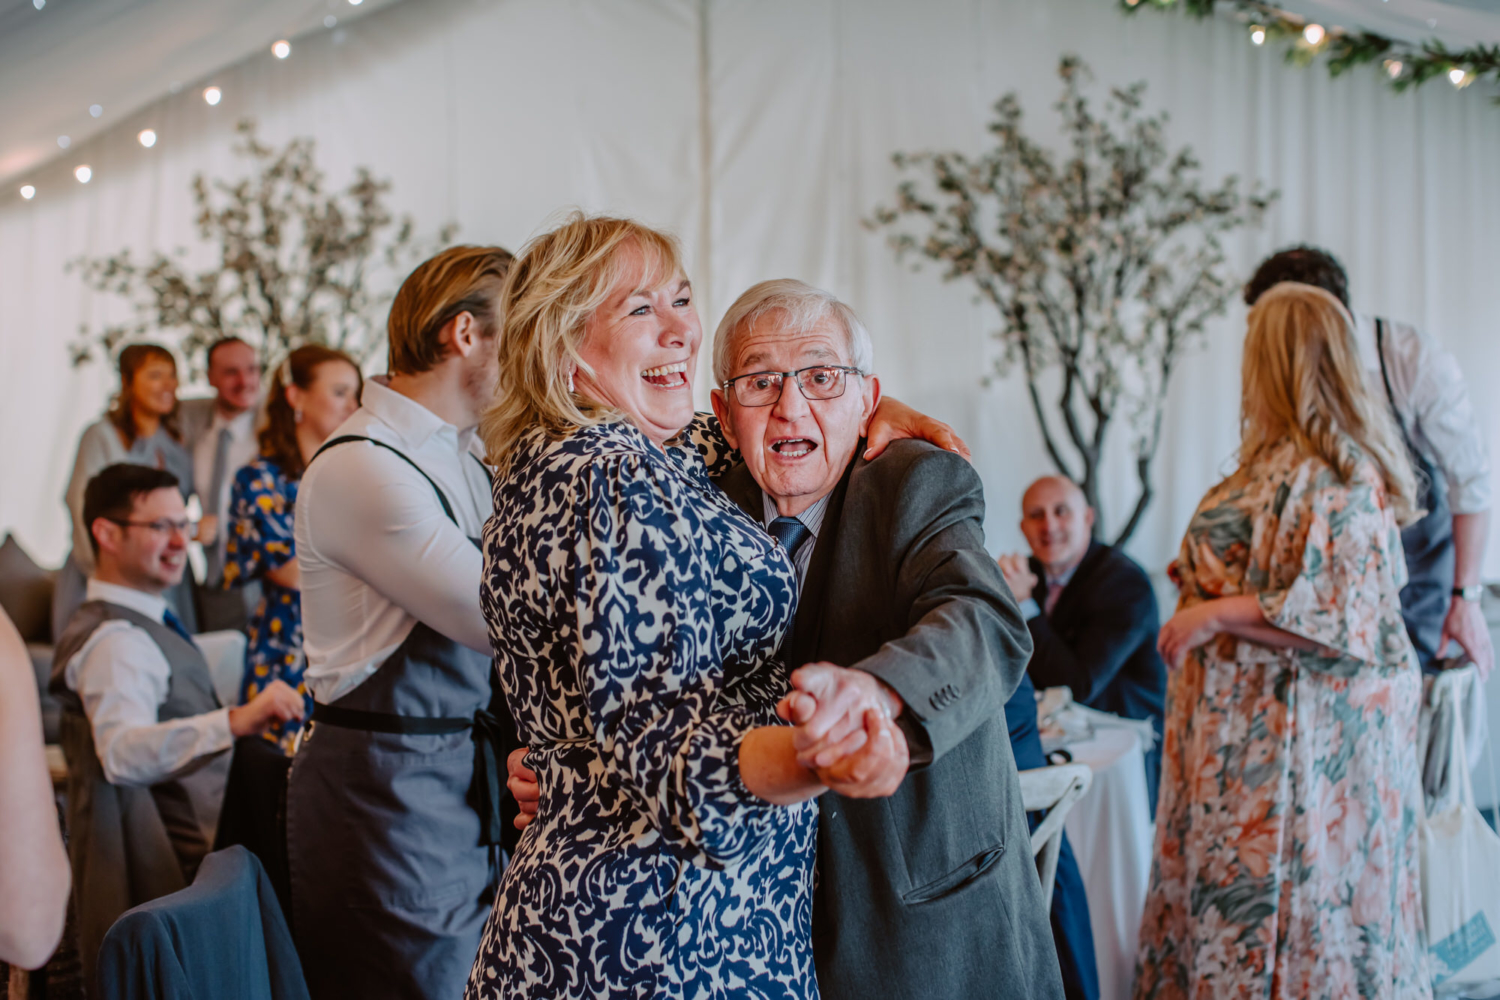 Guest dancing with the granddad 